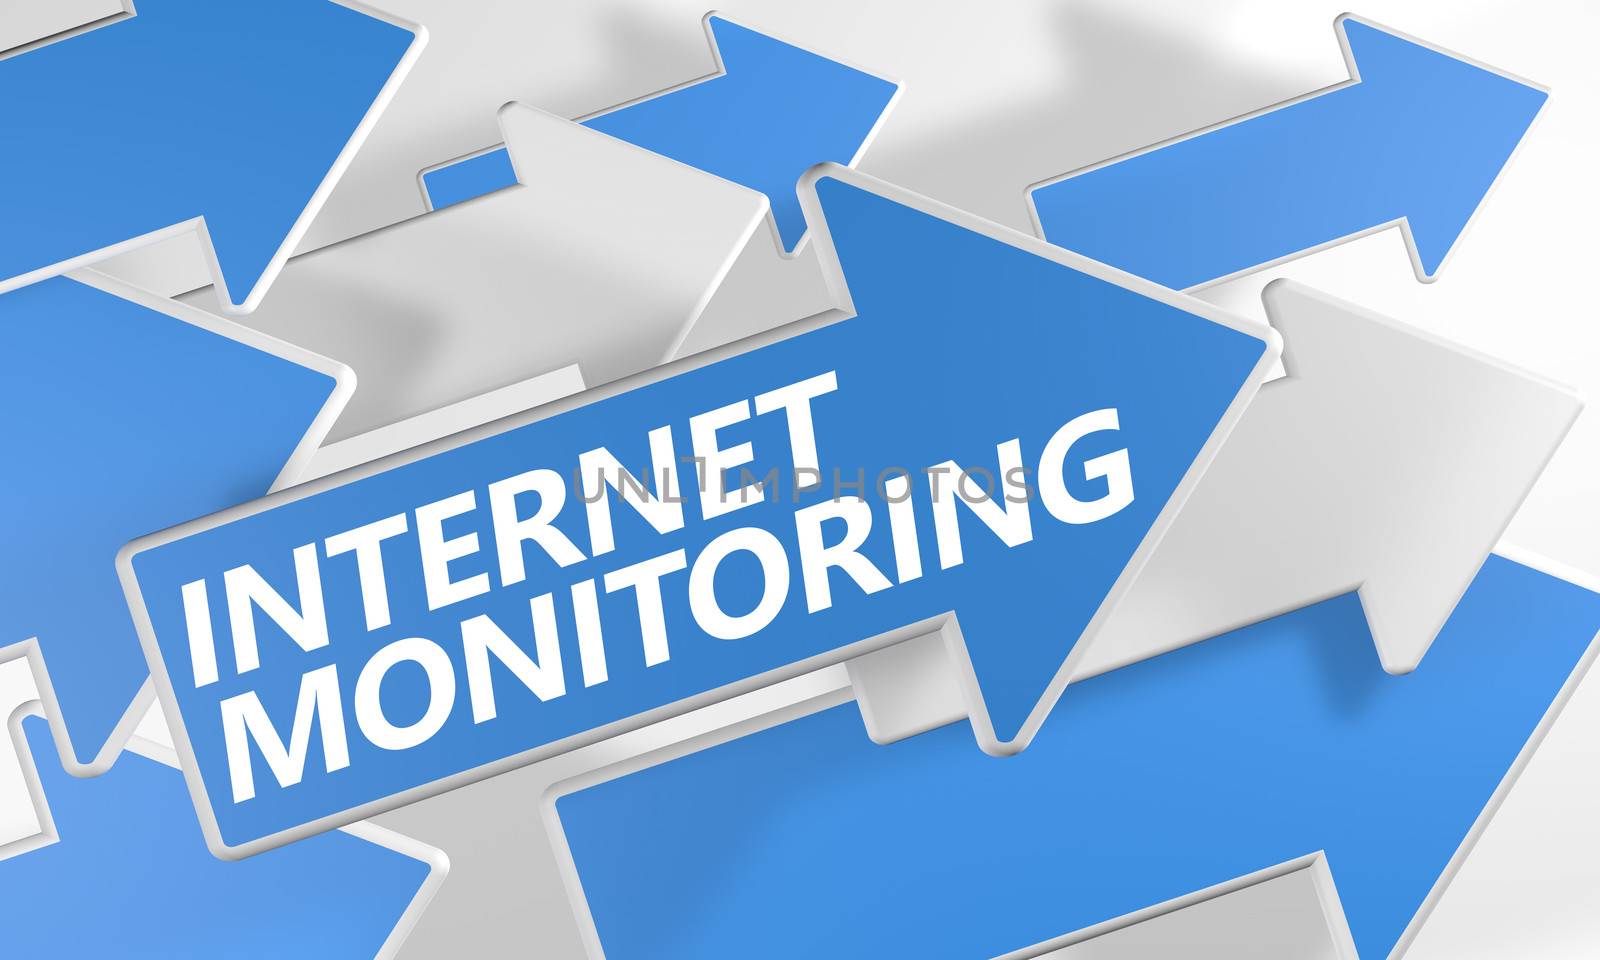 Internet Monitoring 3d render concept with blue and white arrows flying over a white background.